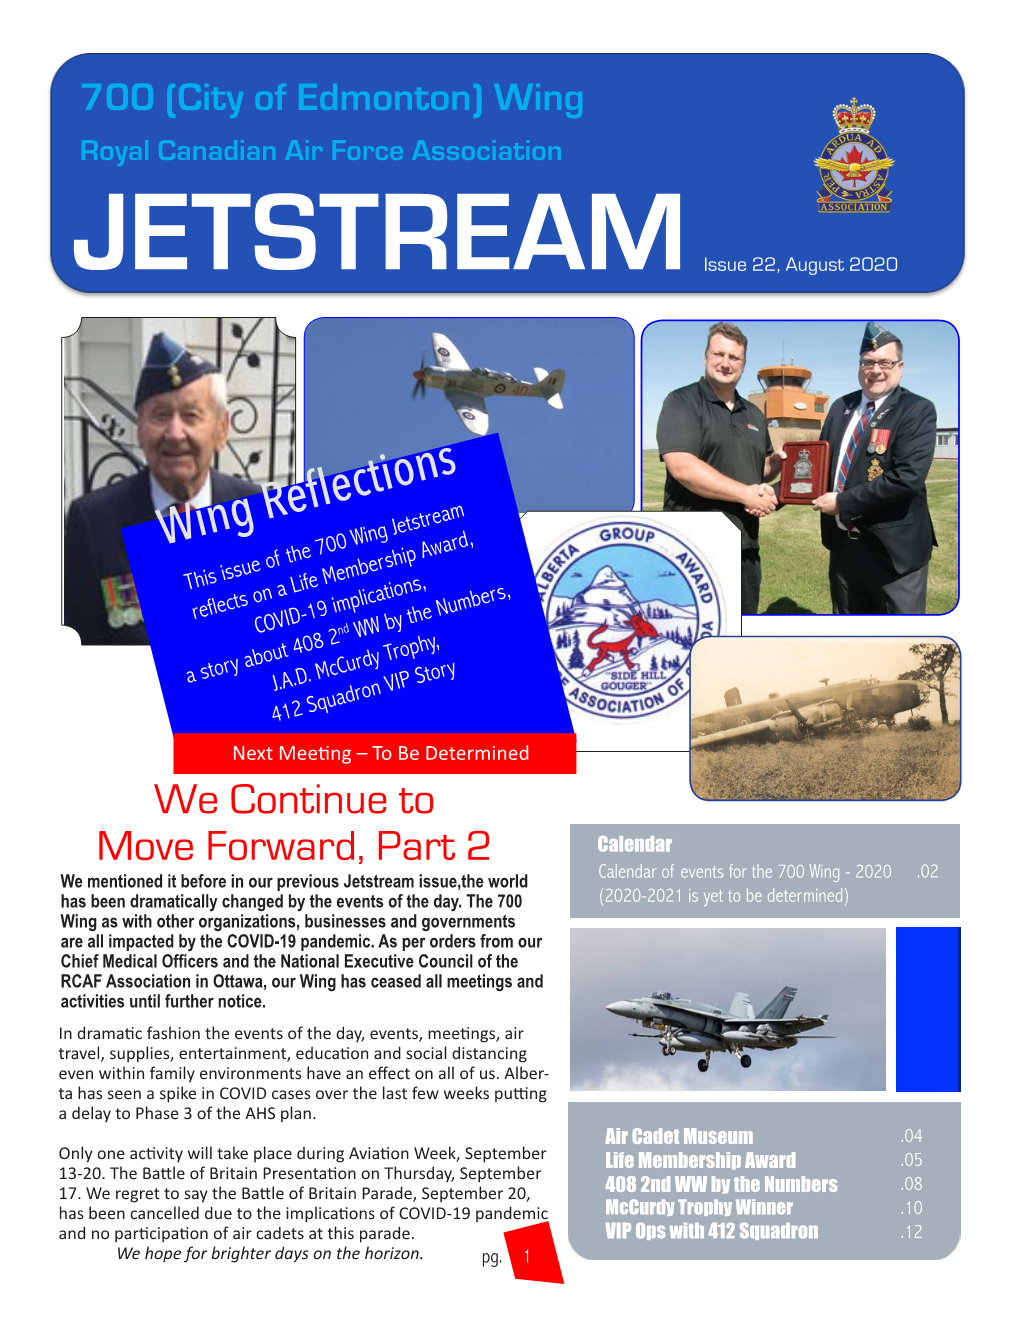 Wing Reflections This Issue of the 700 Wing Jetstream Reflects on a Life Membership Award, COVID-19 Implications,Nd WW by the Numbers